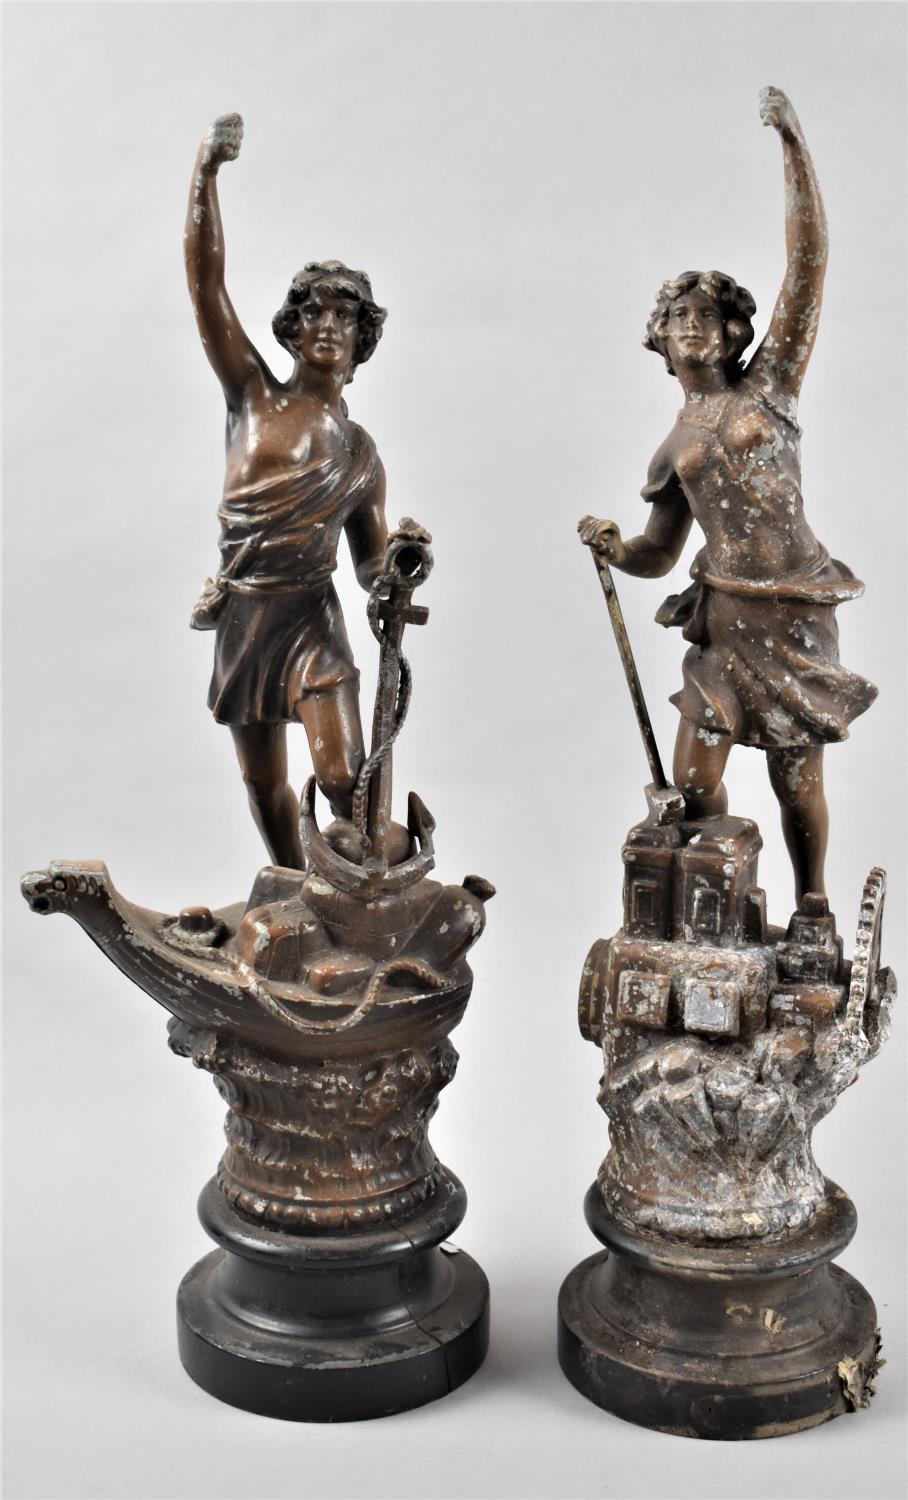 A Pair of Late 19th Century French Spelter Figures for Navy and Industry, Each 44cm High, Some